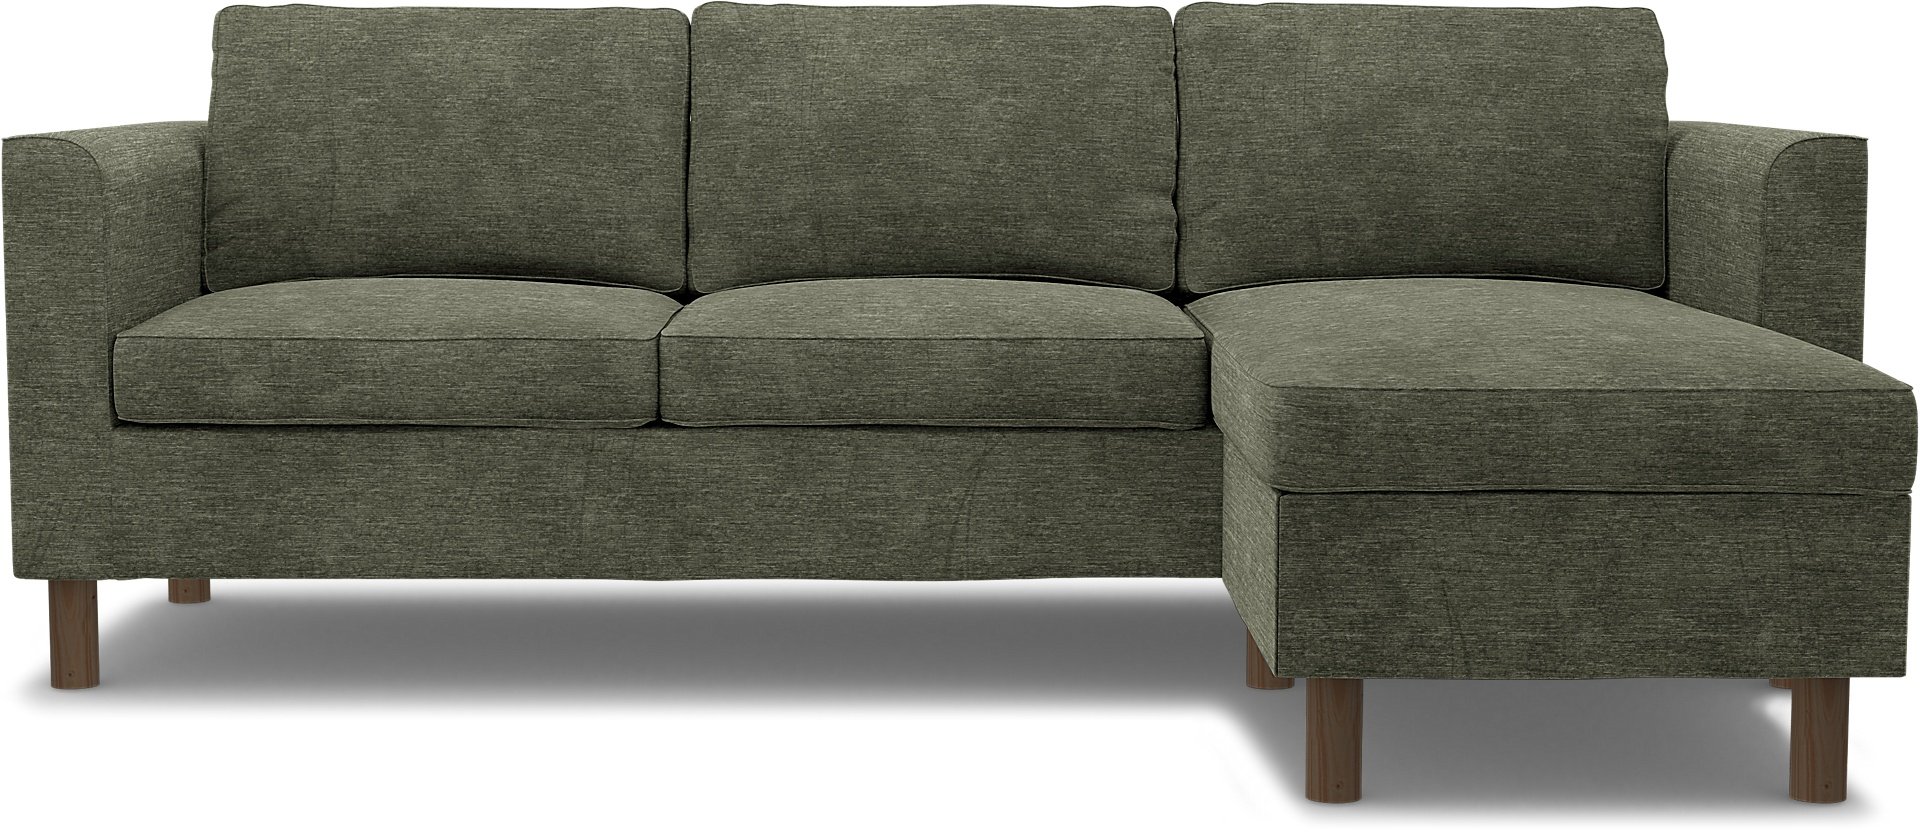 IKEA - Parup 3 Seater with chaise longue, Green Grey, Velvet - Bemz